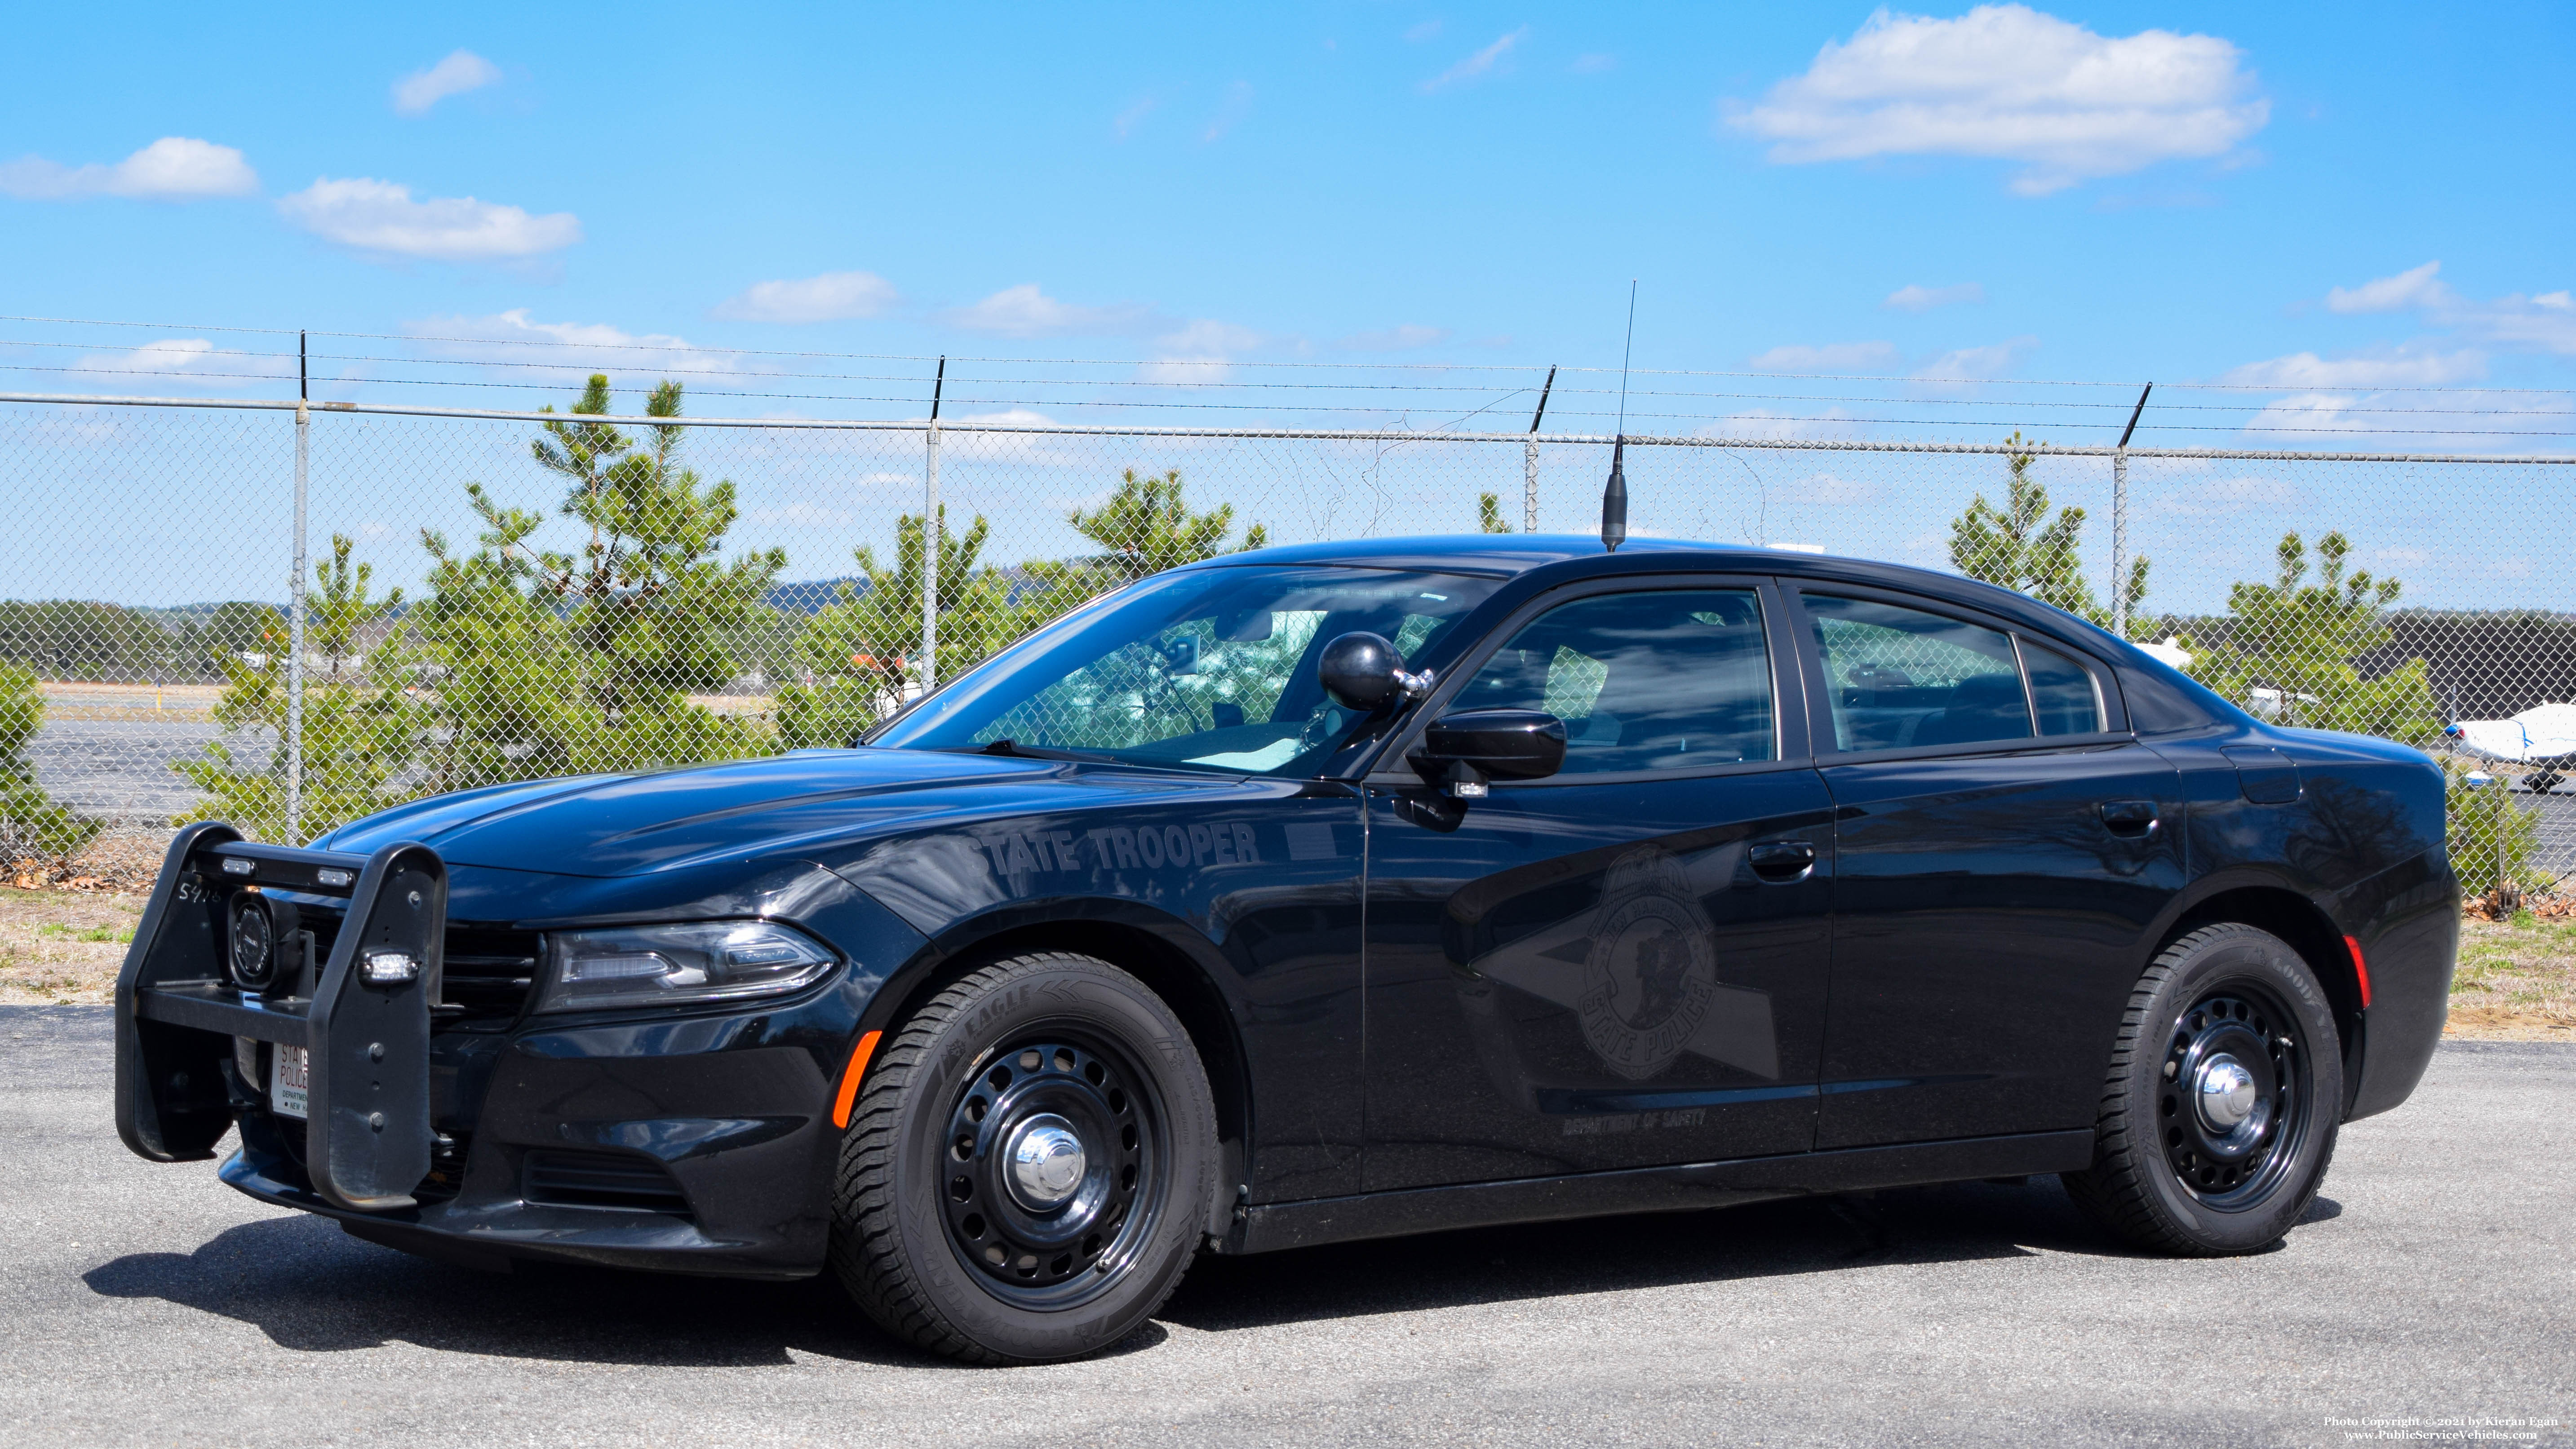 A photo  of New Hampshire State Police
            Cruiser 214, a 2018-2019 Dodge Charger             taken by Kieran Egan